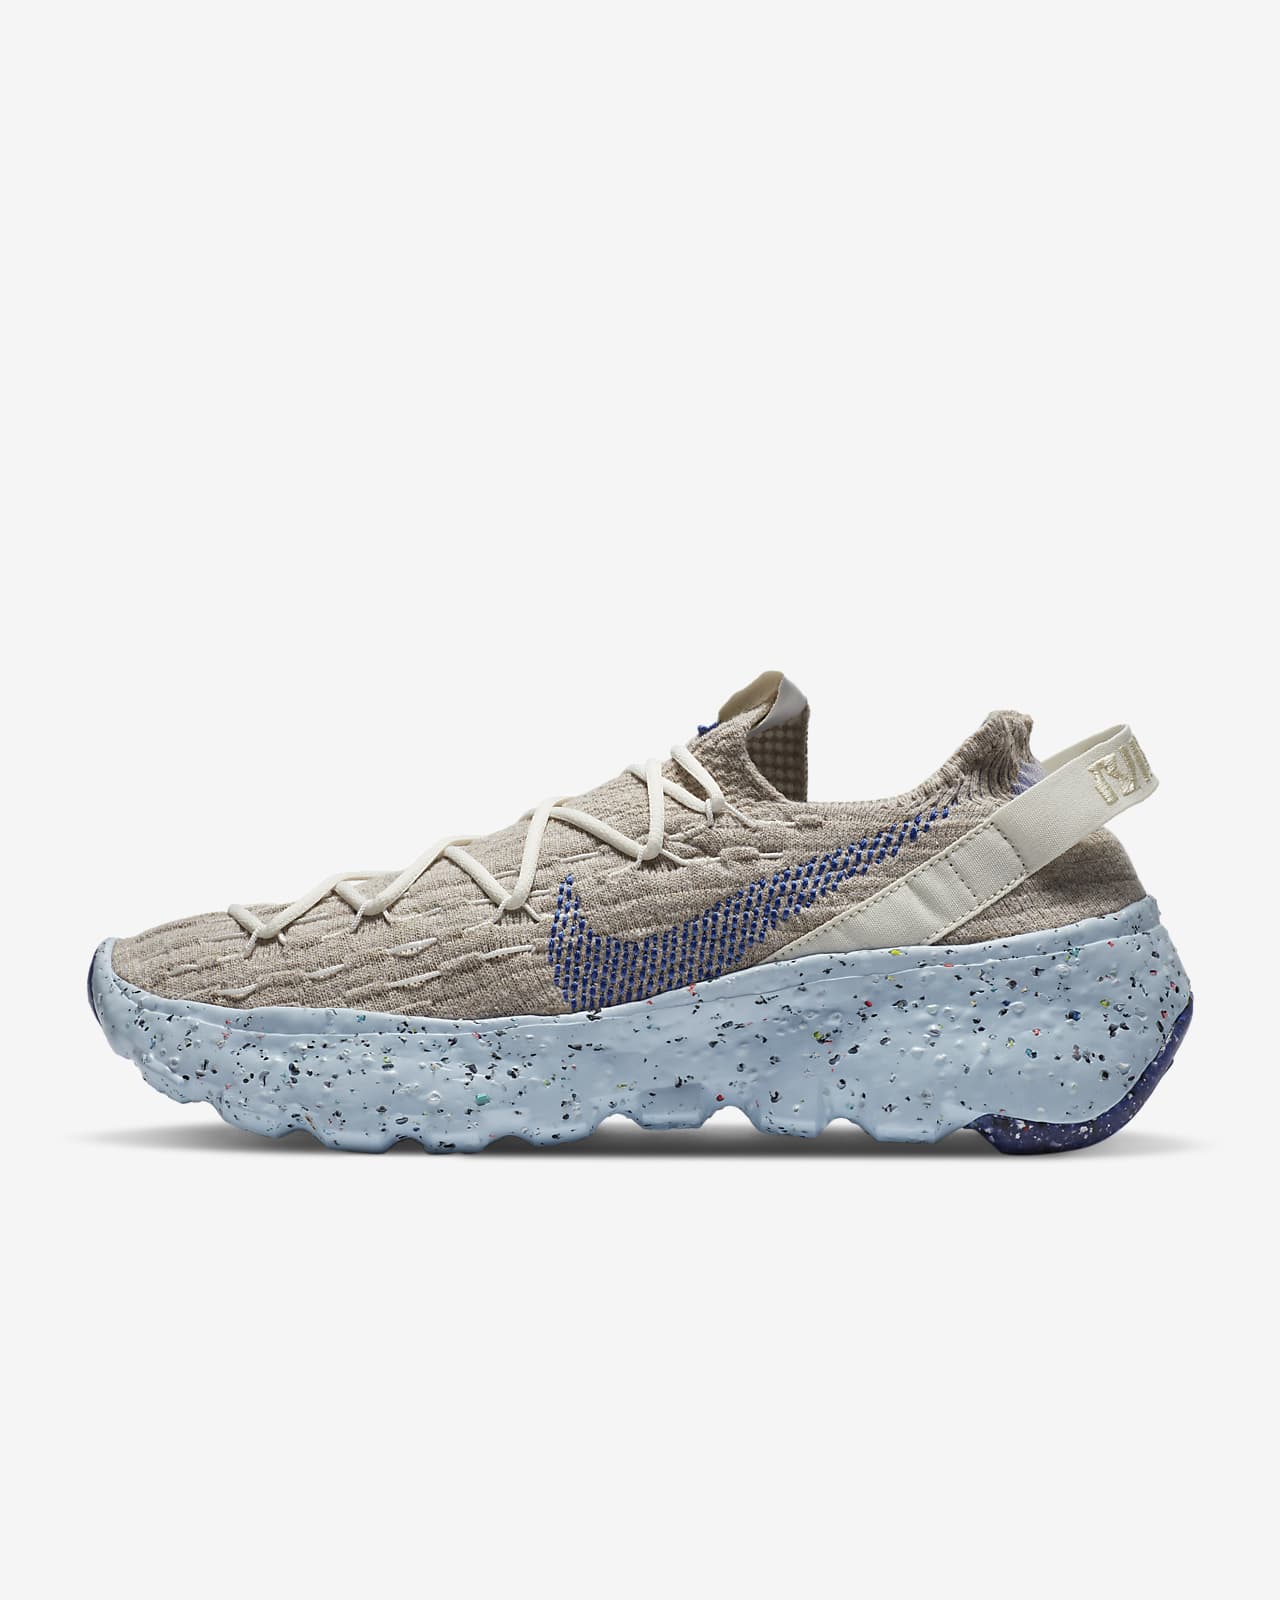 nike space hippie shoes price